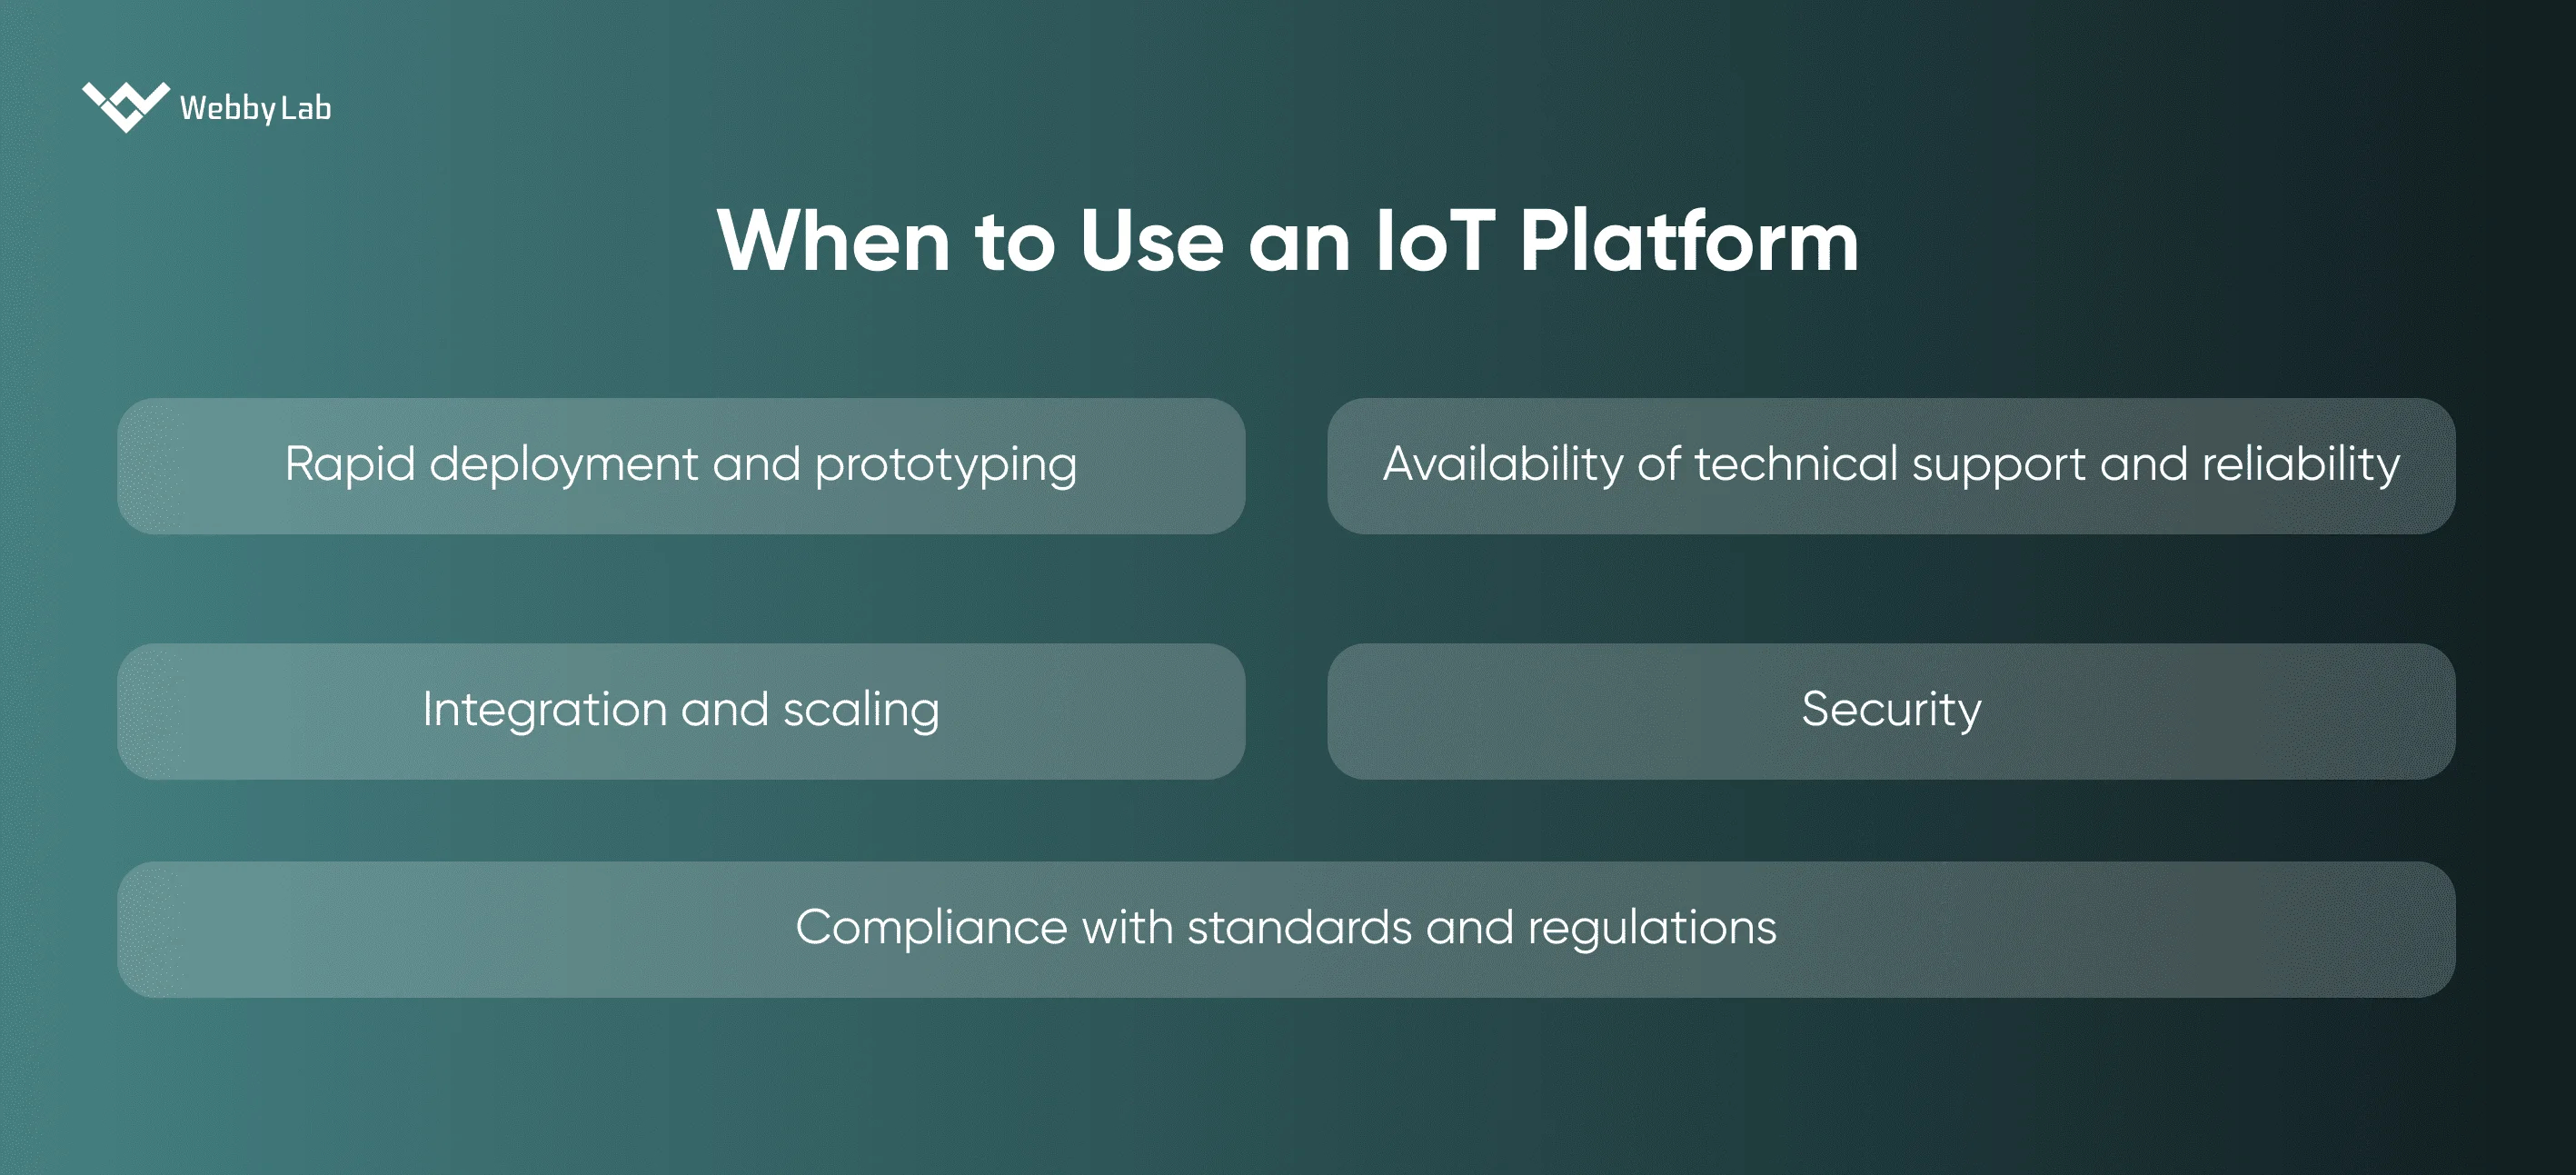 When to Use an Iot Platform